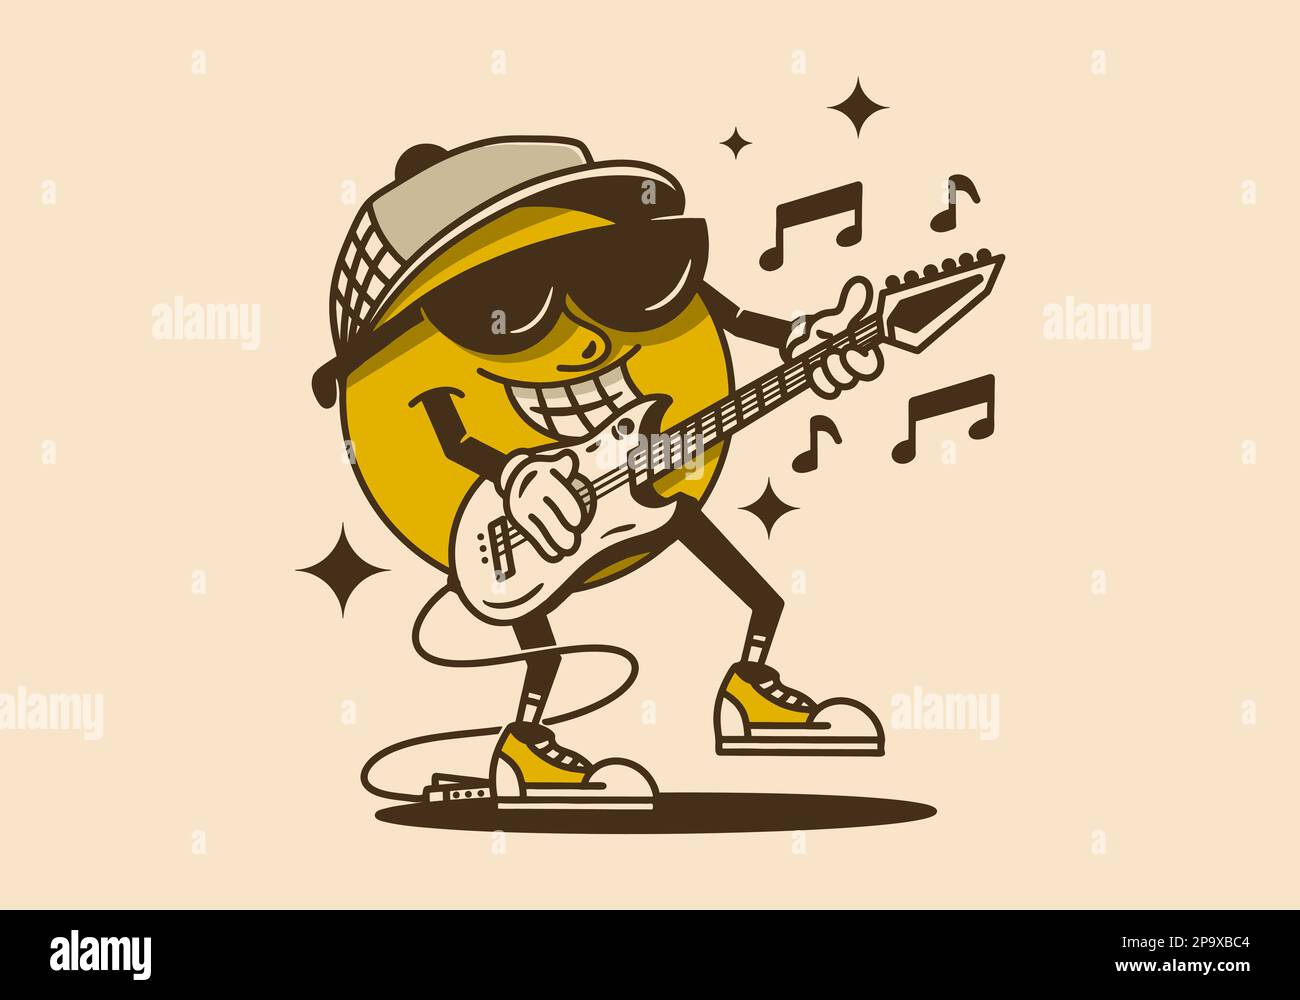 Mascot character design of a yellow ball playing rock music with guitar Stock Vector